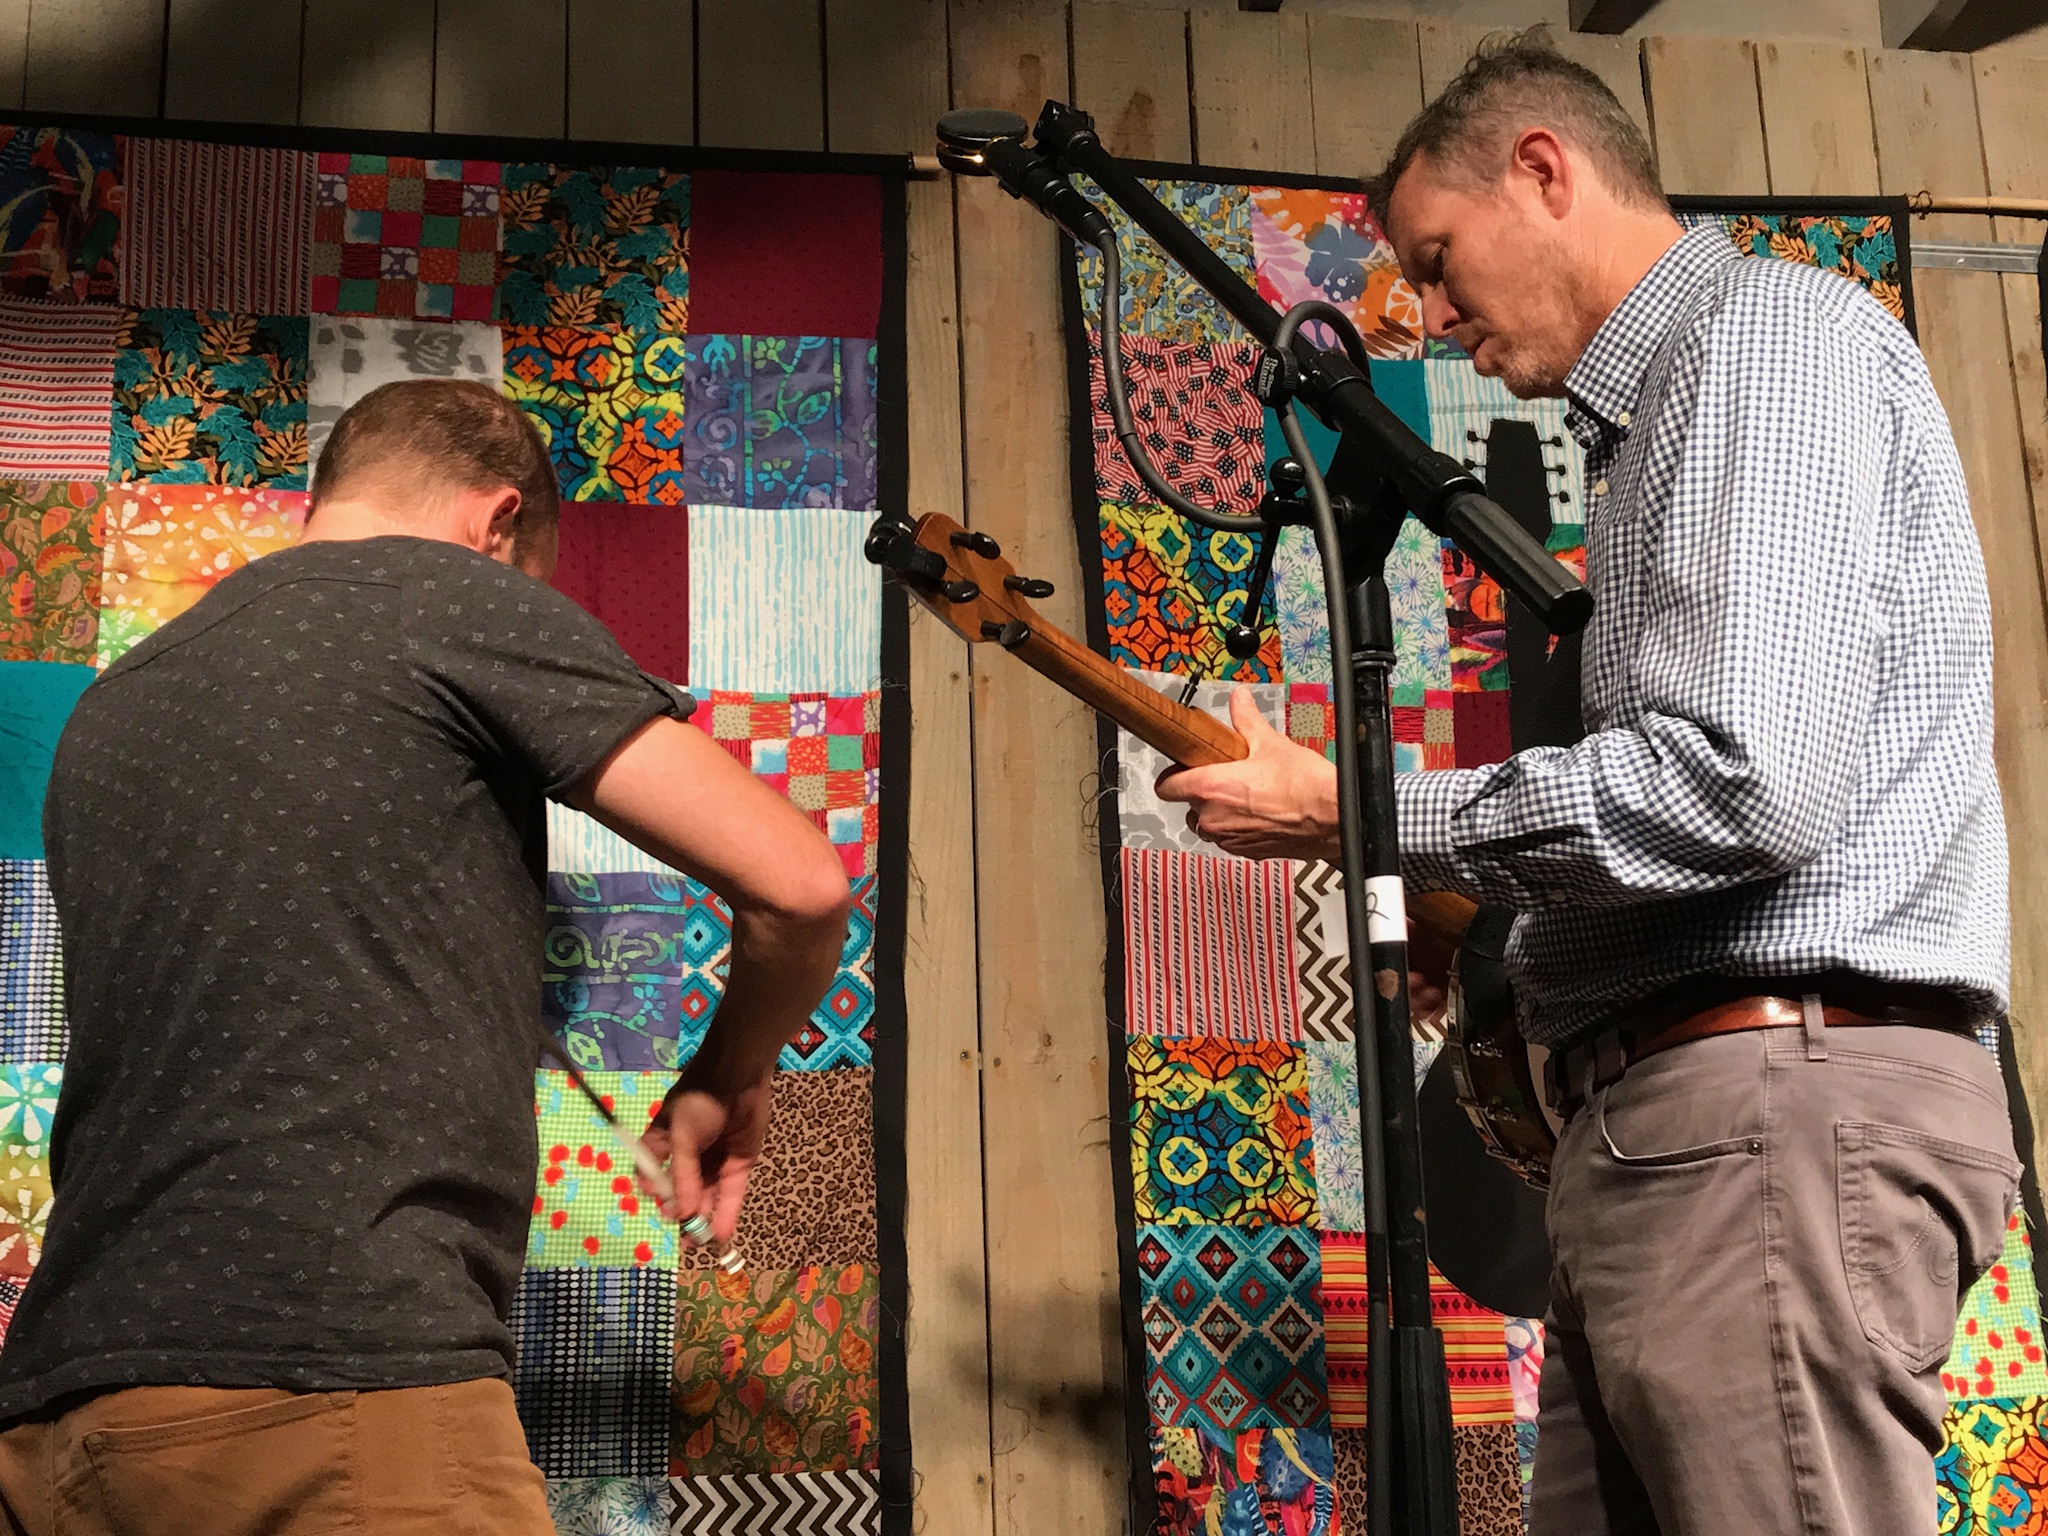 Shad Cobb and Robbie Fulks warming up for a fiddle and banjo duet at the start of the second set at the IBMM in Owensboro.  Photo taken by and the property of FourWalls.